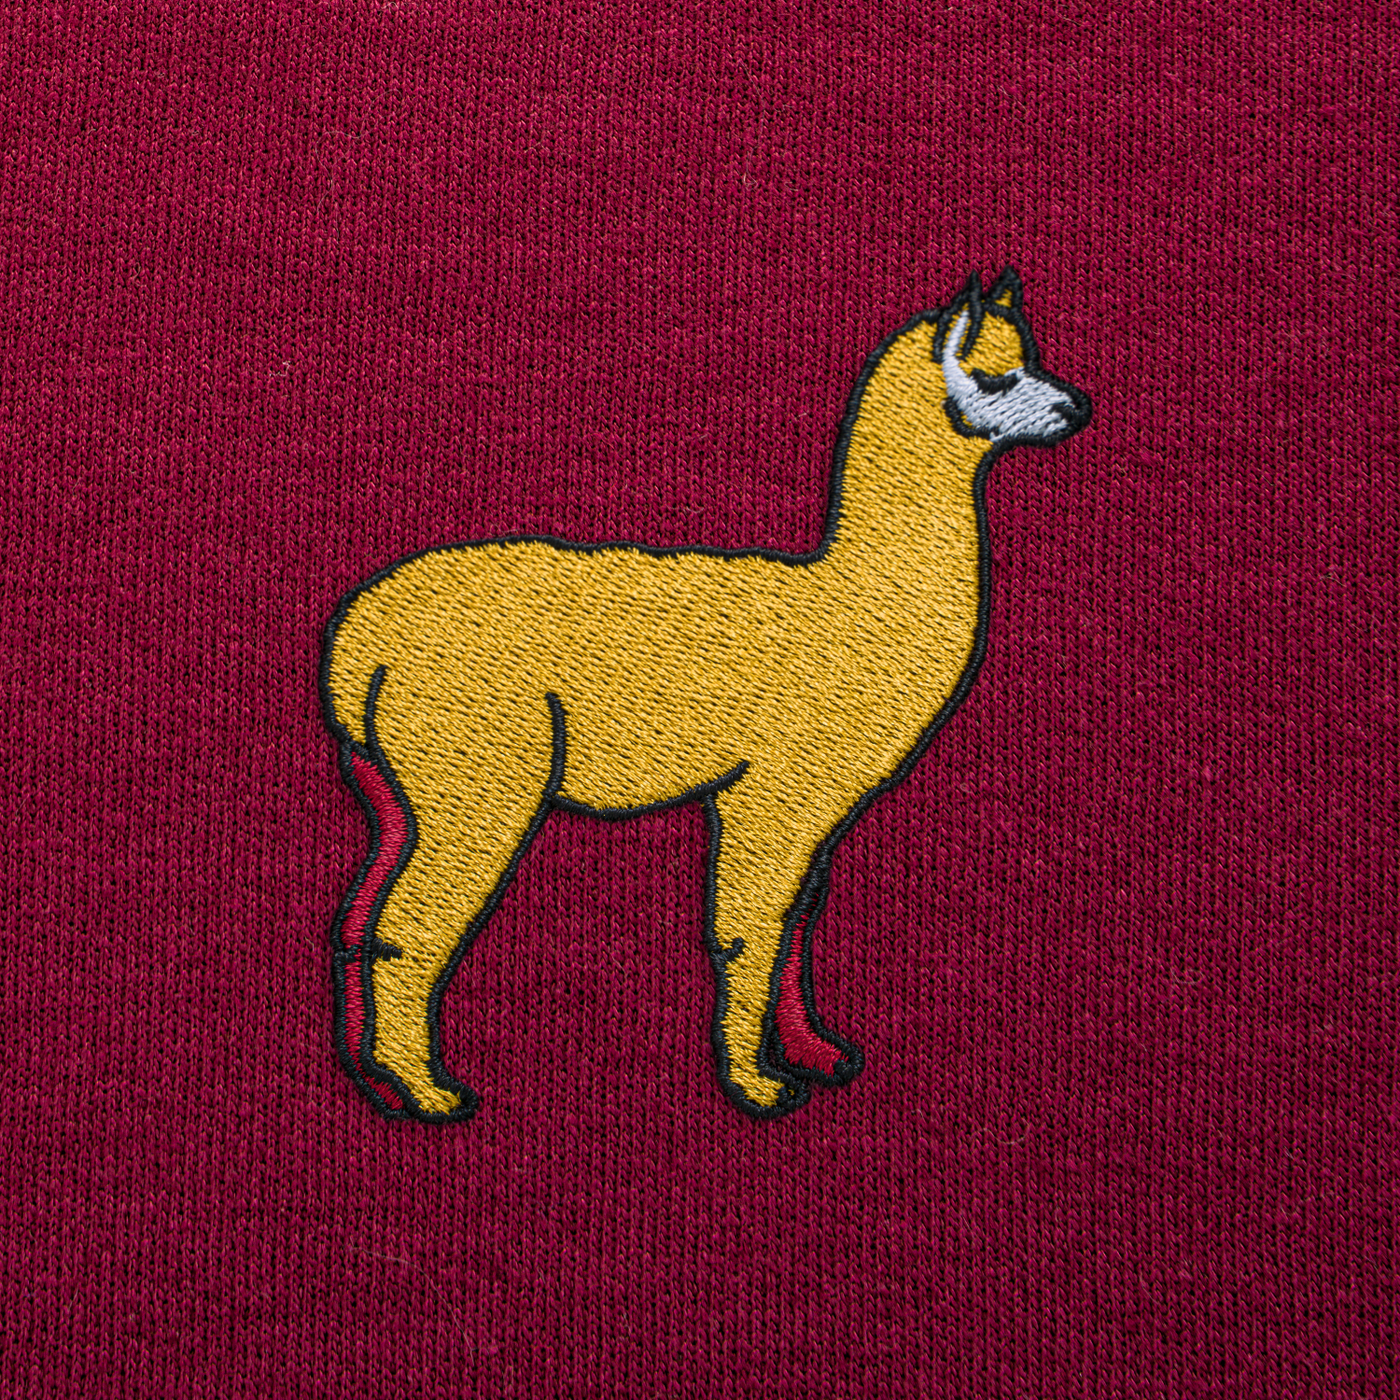 Bobby's Planet Men's Embroidered Alpaca Sweatshirt from South American Amazon Animals Collection in Maroon Color#color_maroon